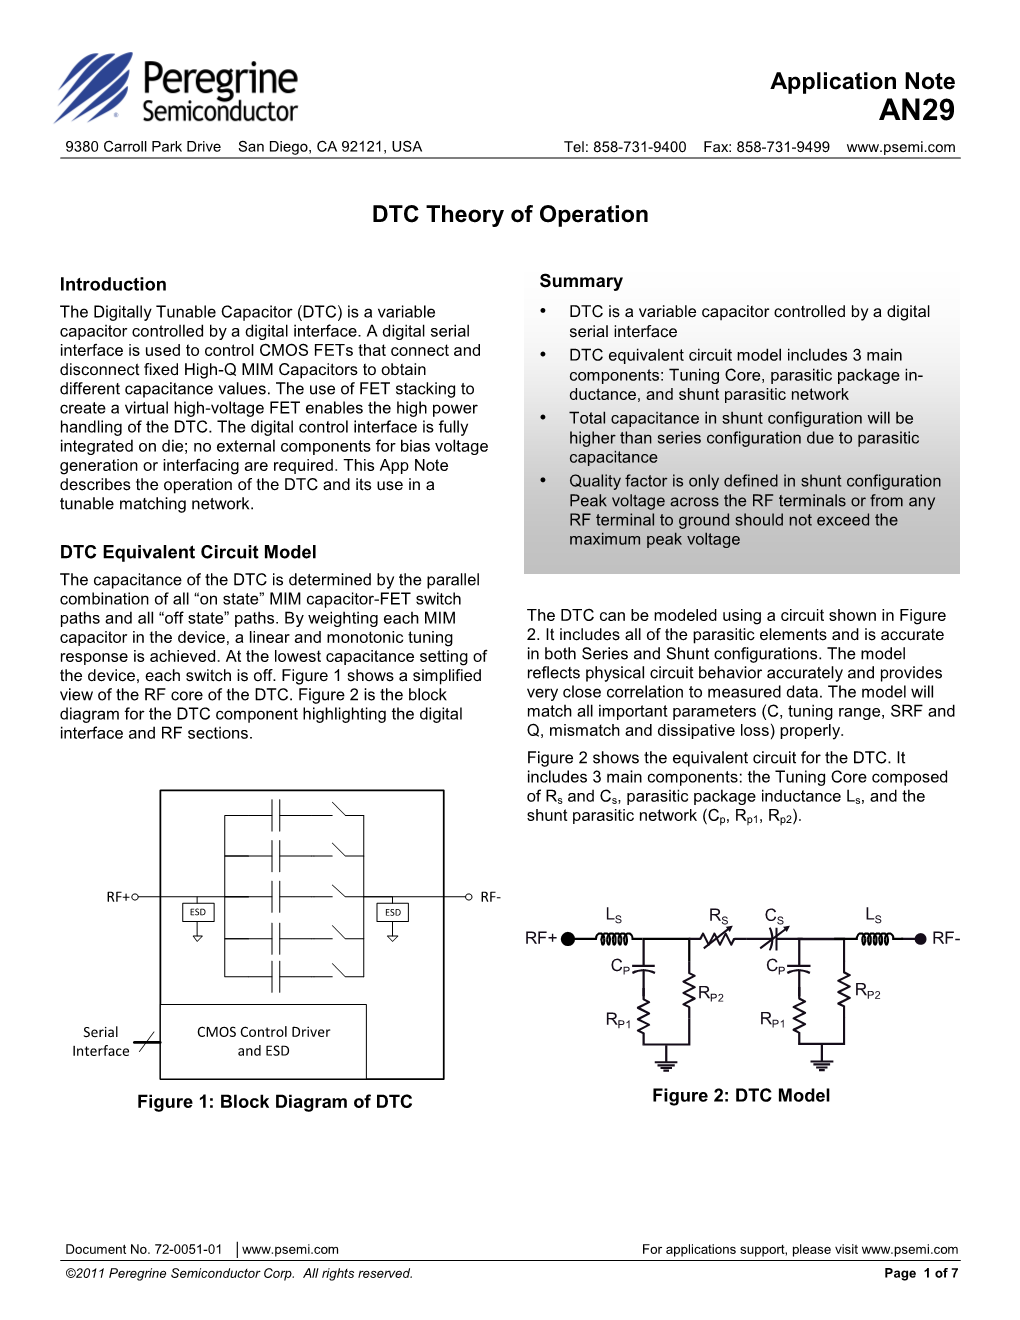 Application Note DTC Theory of Operation